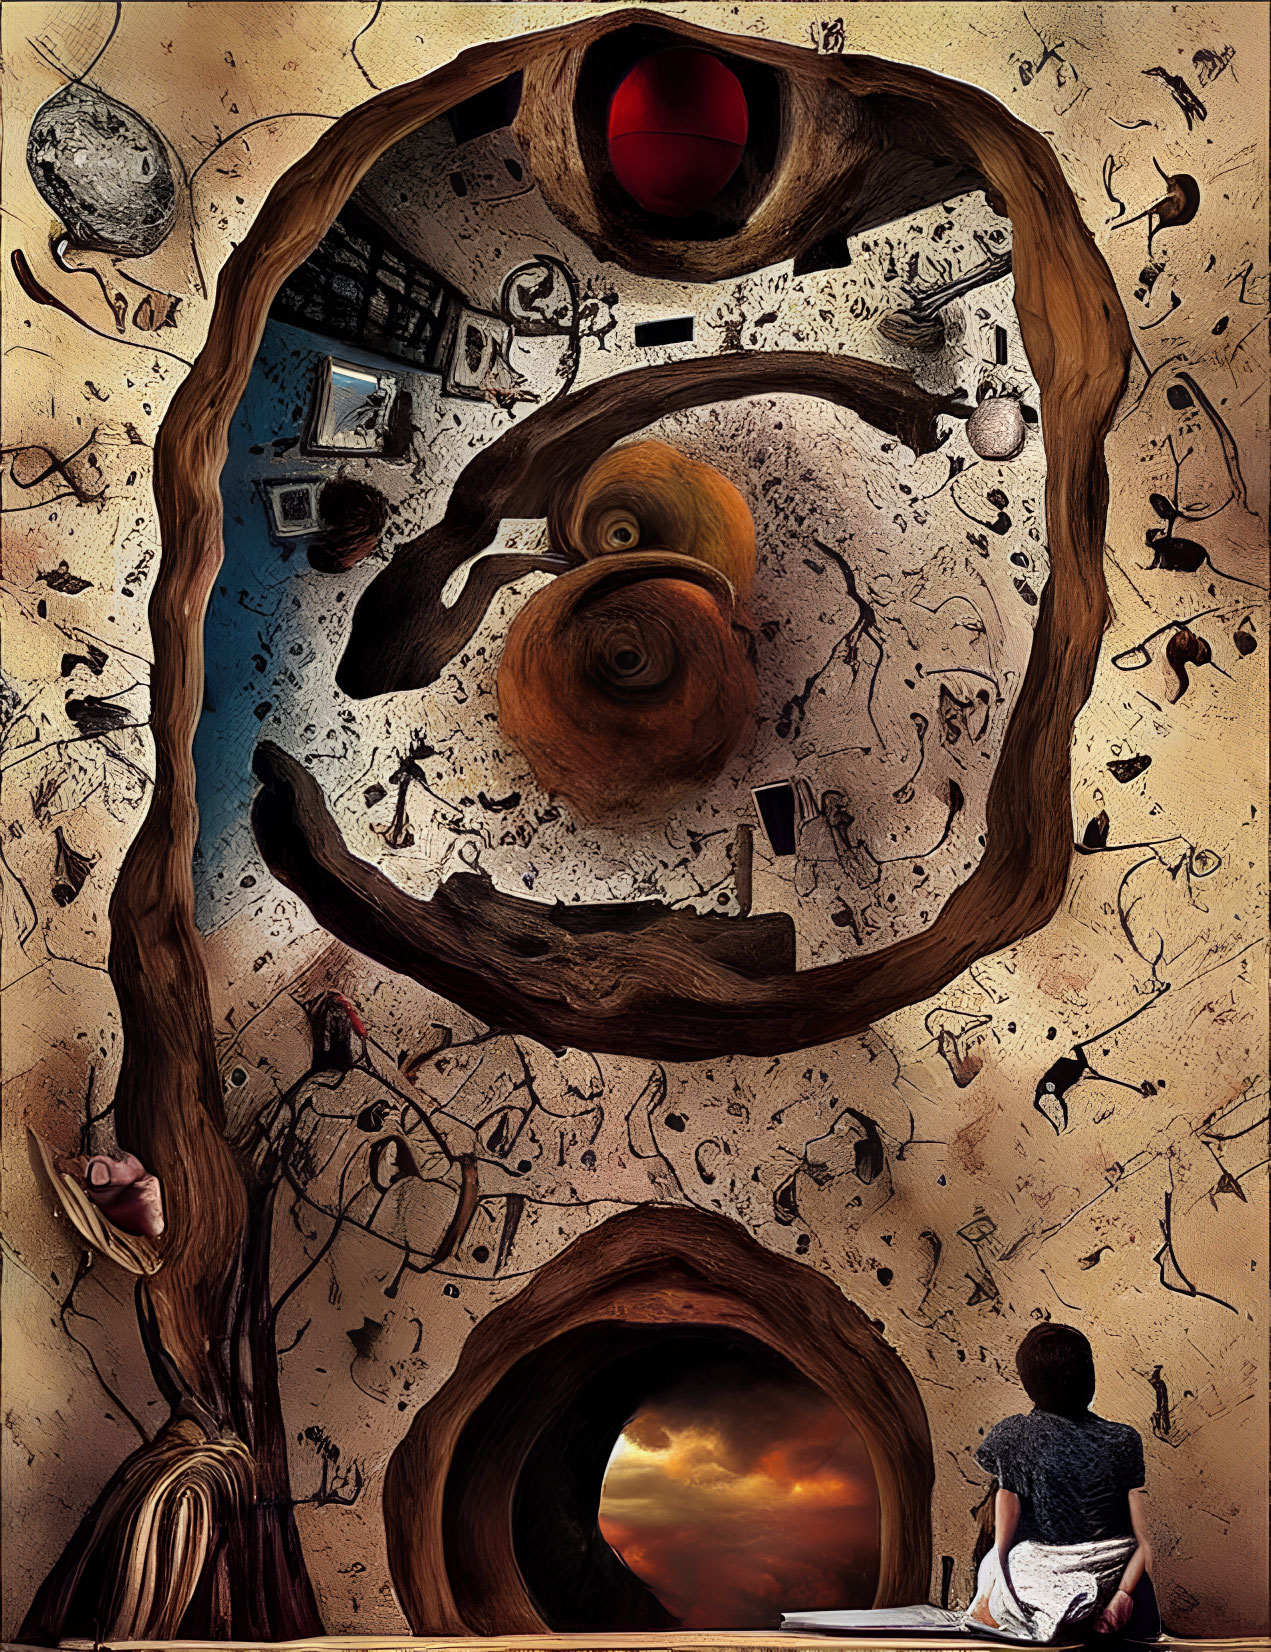 Surreal artwork: person gazes at spiral abyss, surrounded by floating objects and symbols